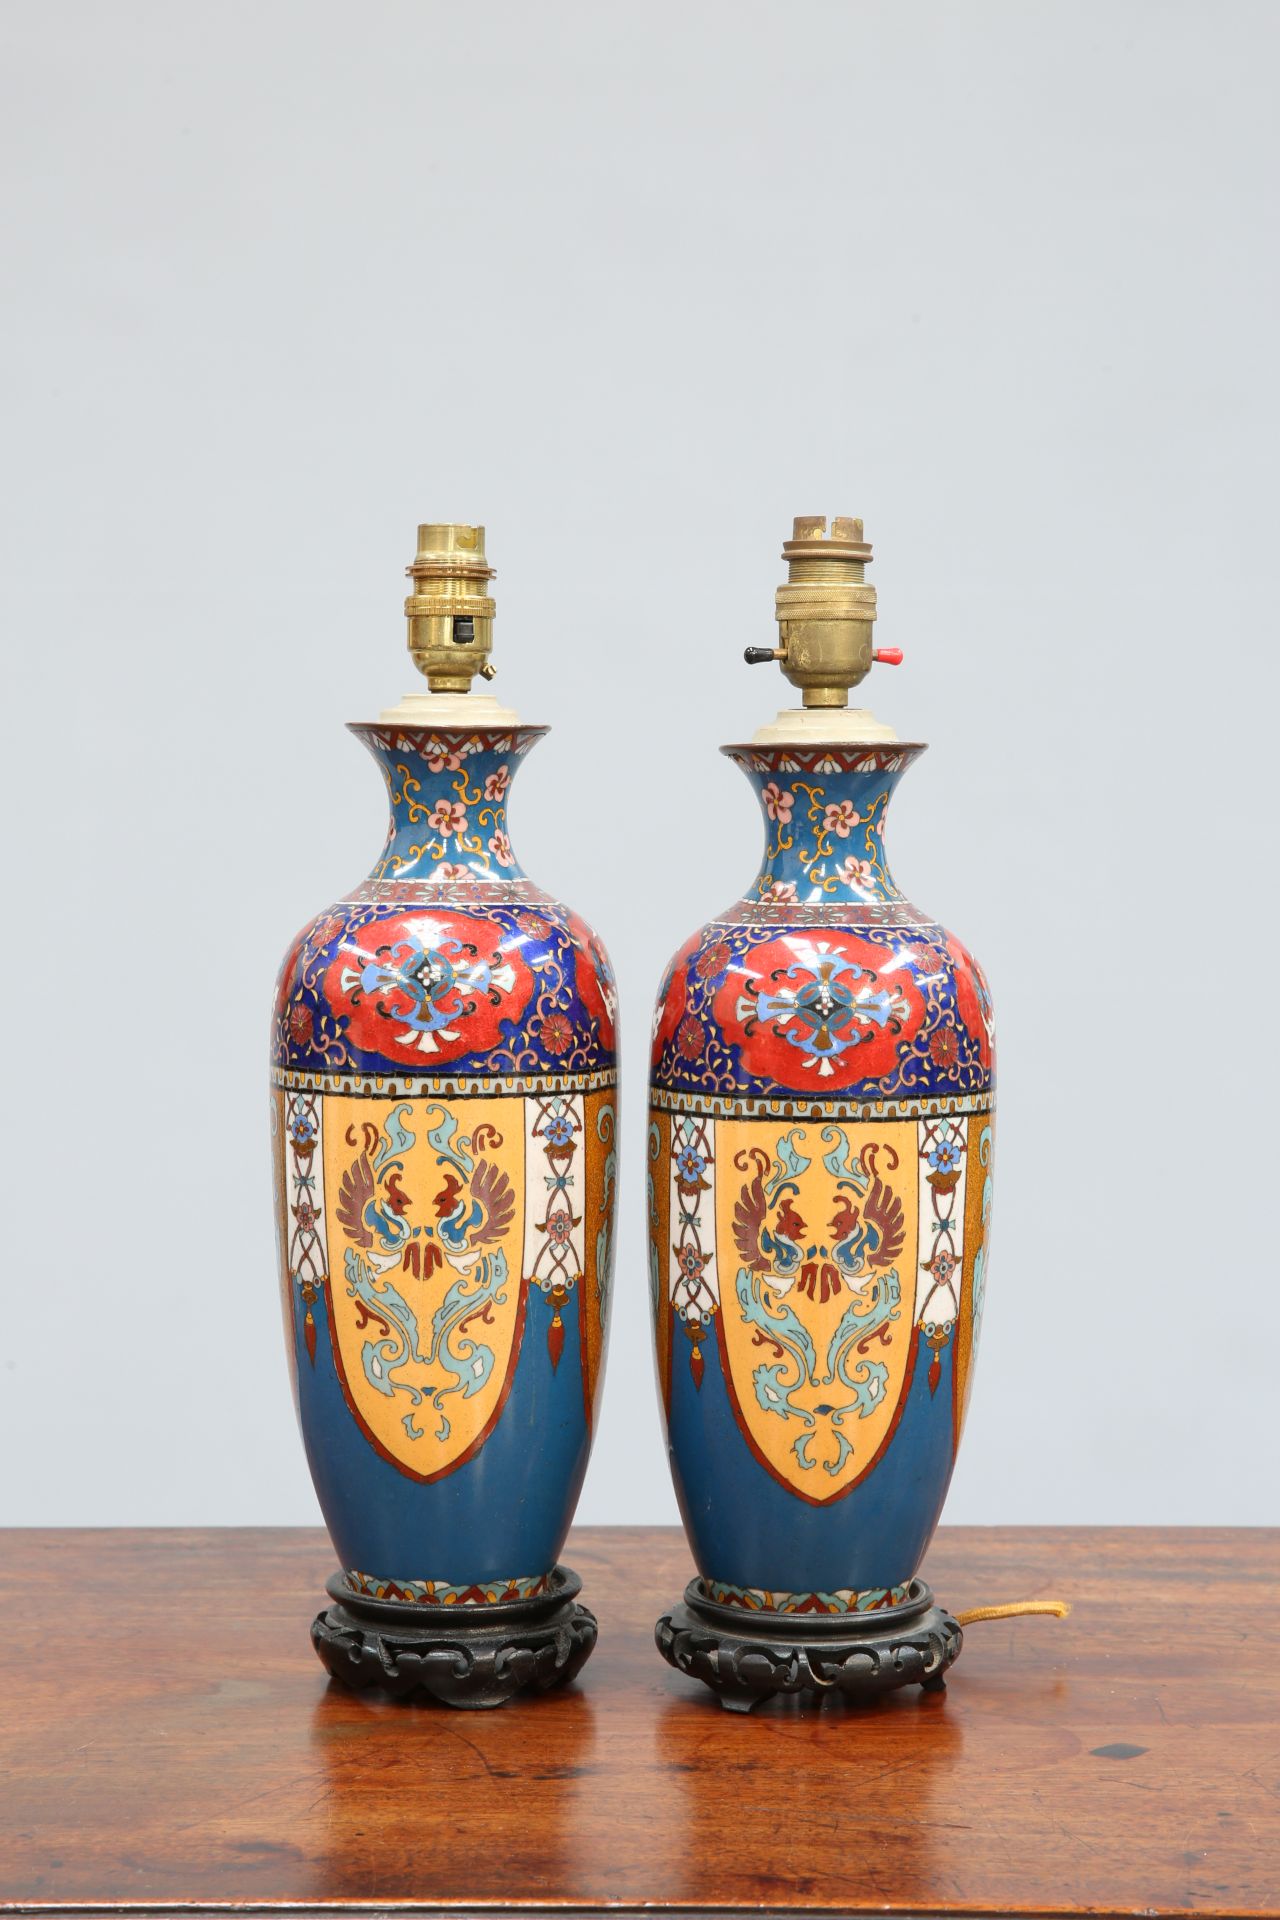 A PAIR OF JAPANESE CLOISONNE LAMP BASES, MEIJI PERIOD